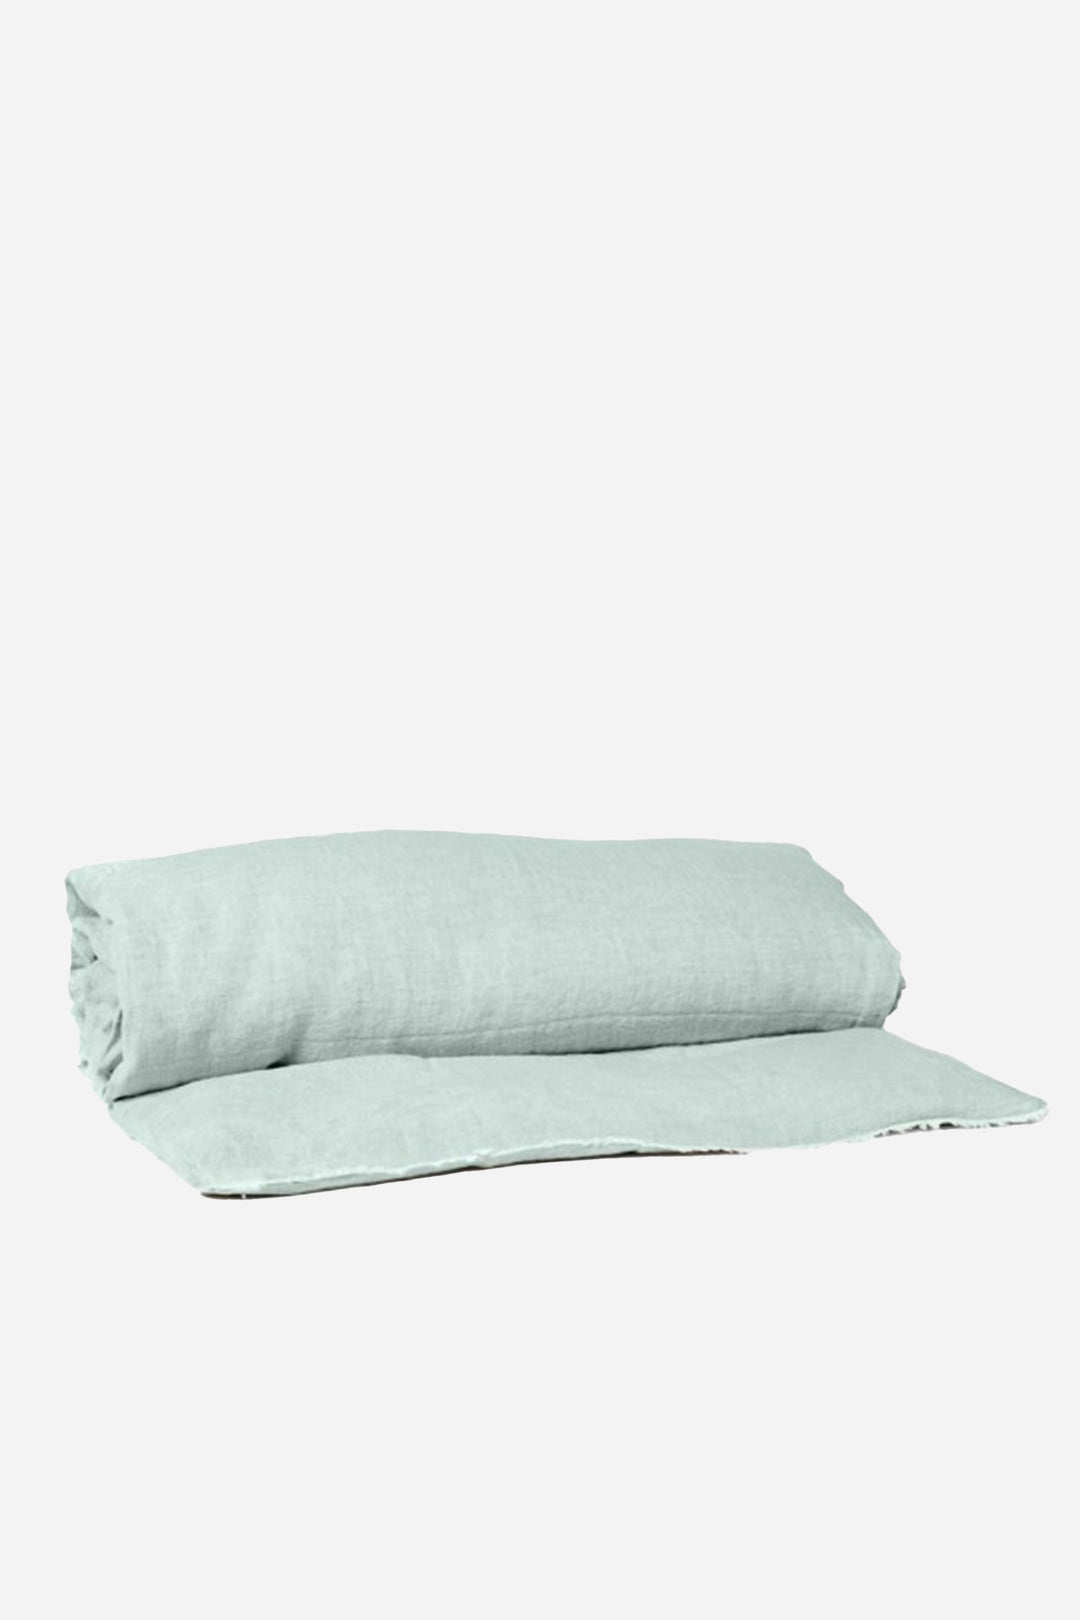 Tumbled Linen Bed Roll / Celadon - Domestic Science Home